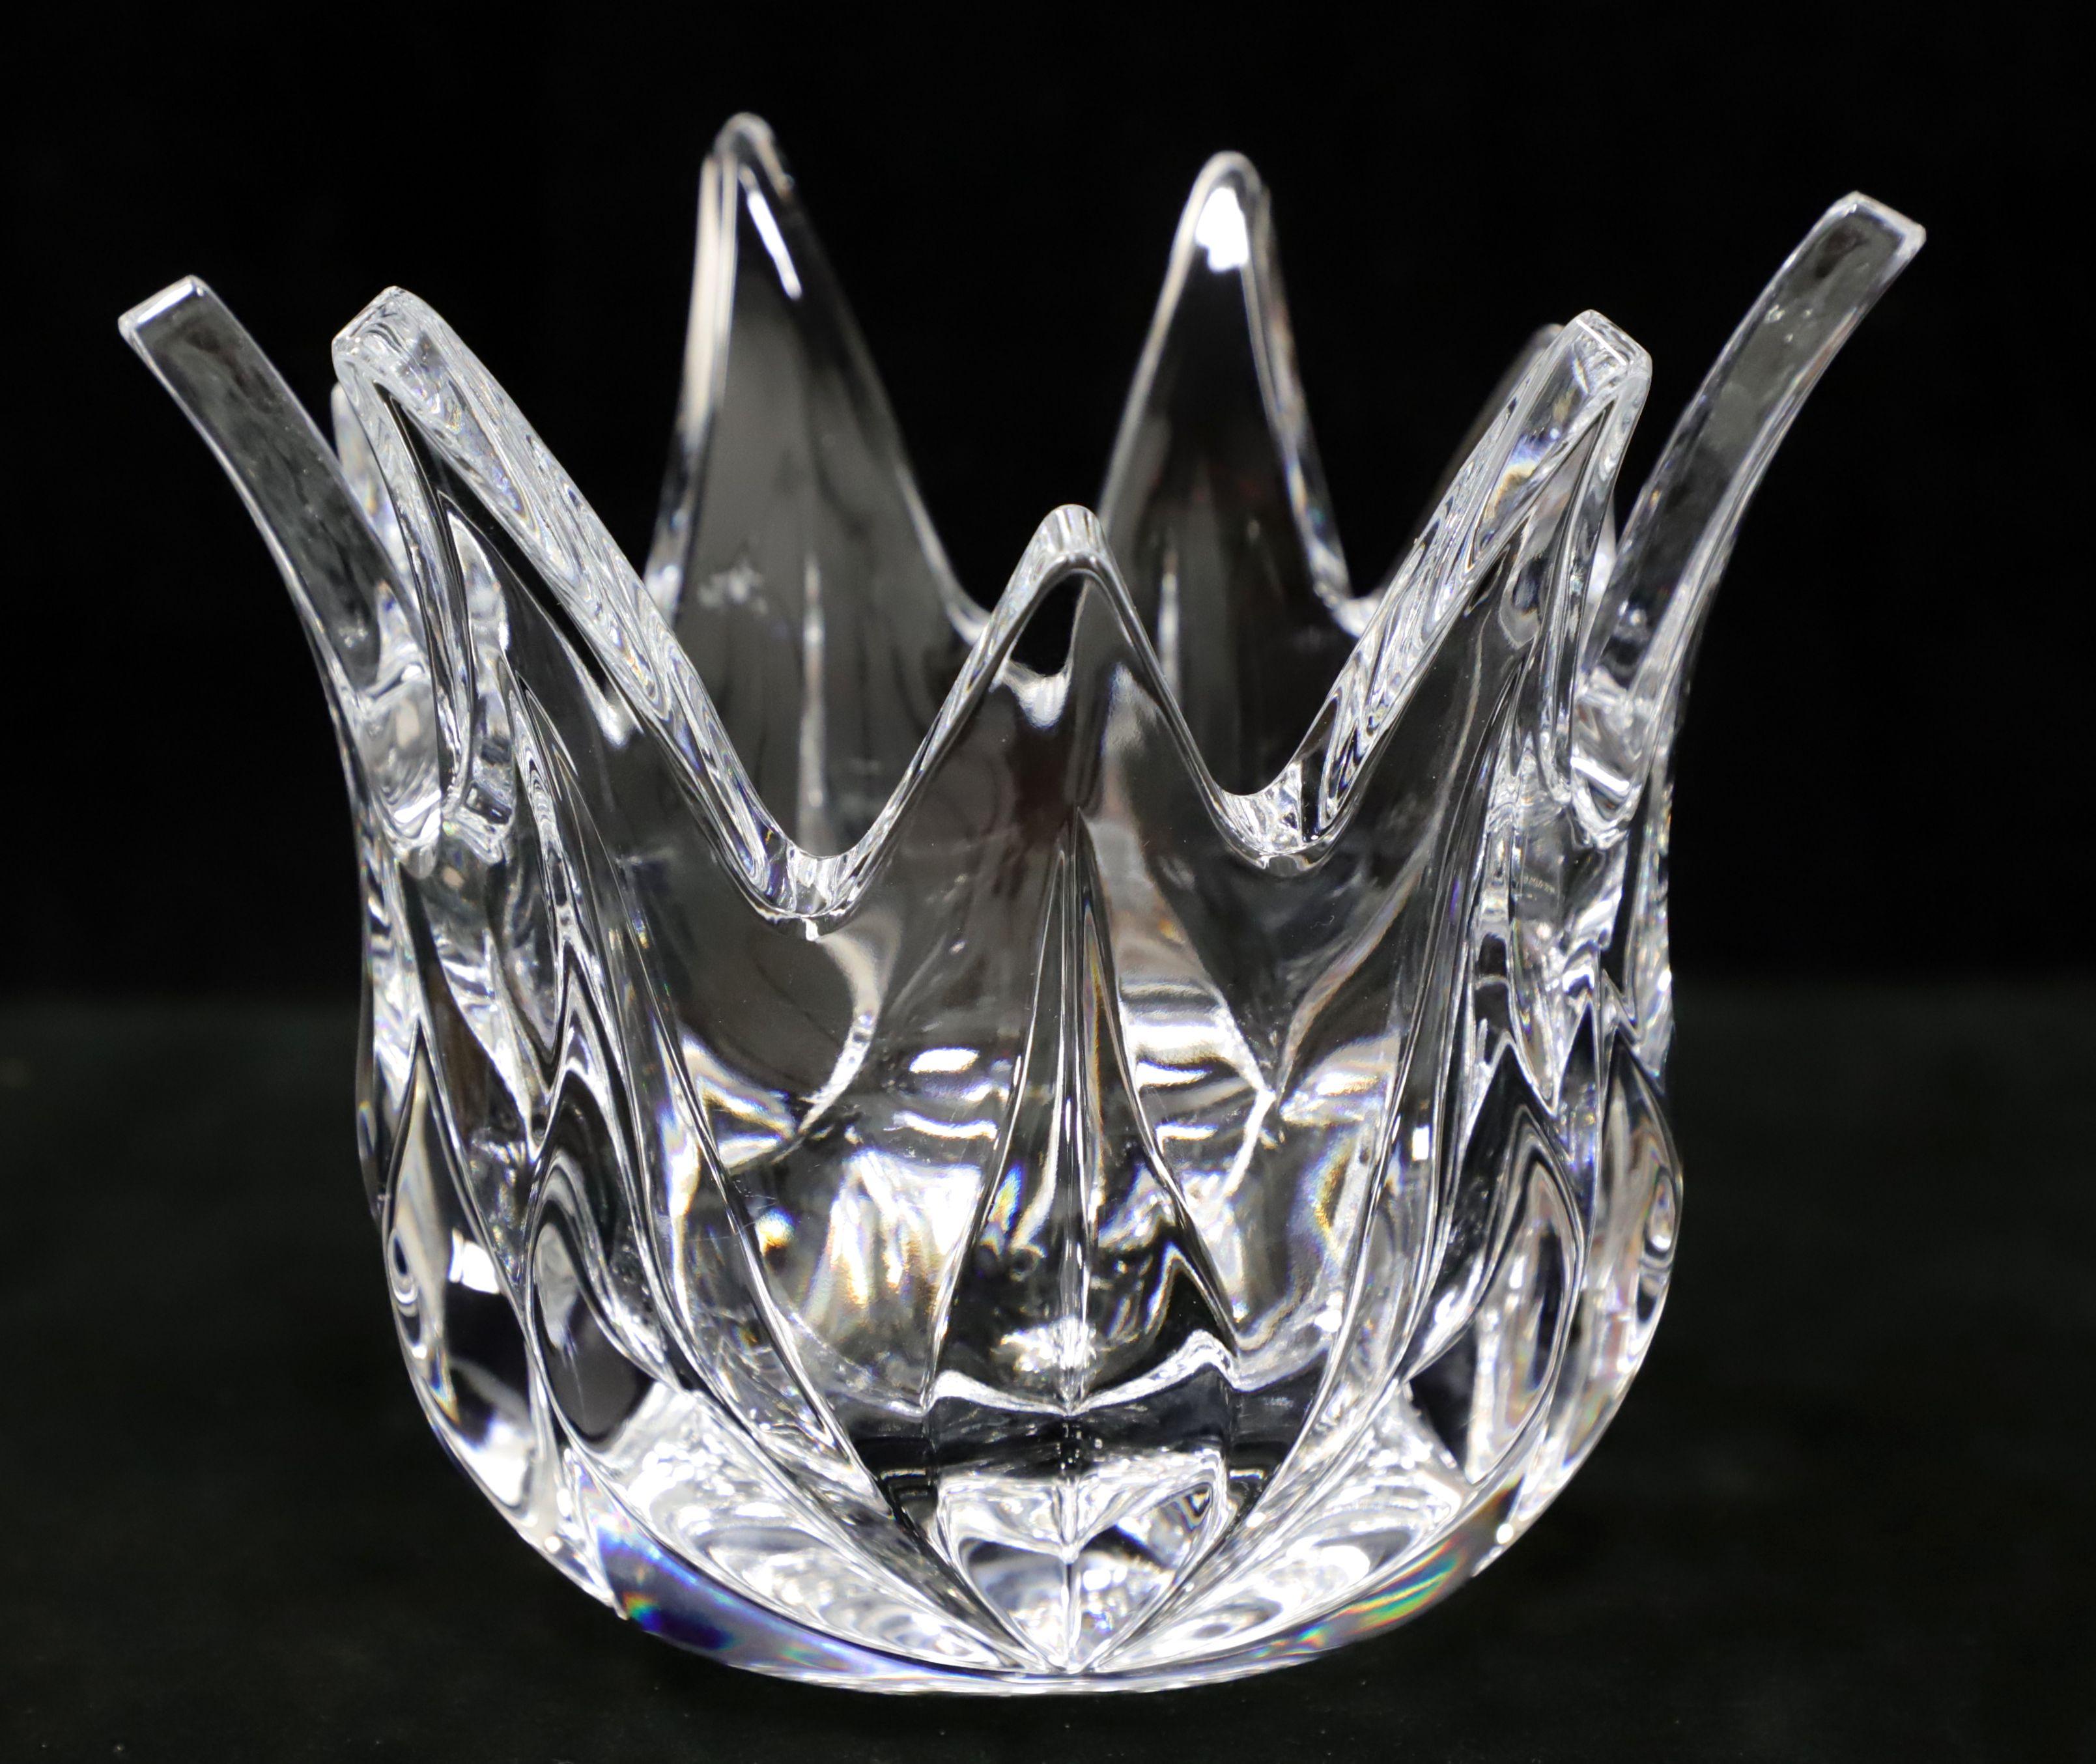 A Late 20th Century decorative crystal bowl. Clear crystal round bowl with flared out points at top that alternate in size and a cut pattern at base. Origin unknown, most likely the USA.

Measures: 8w 8d 6.5h, Weighs Approximately: 6